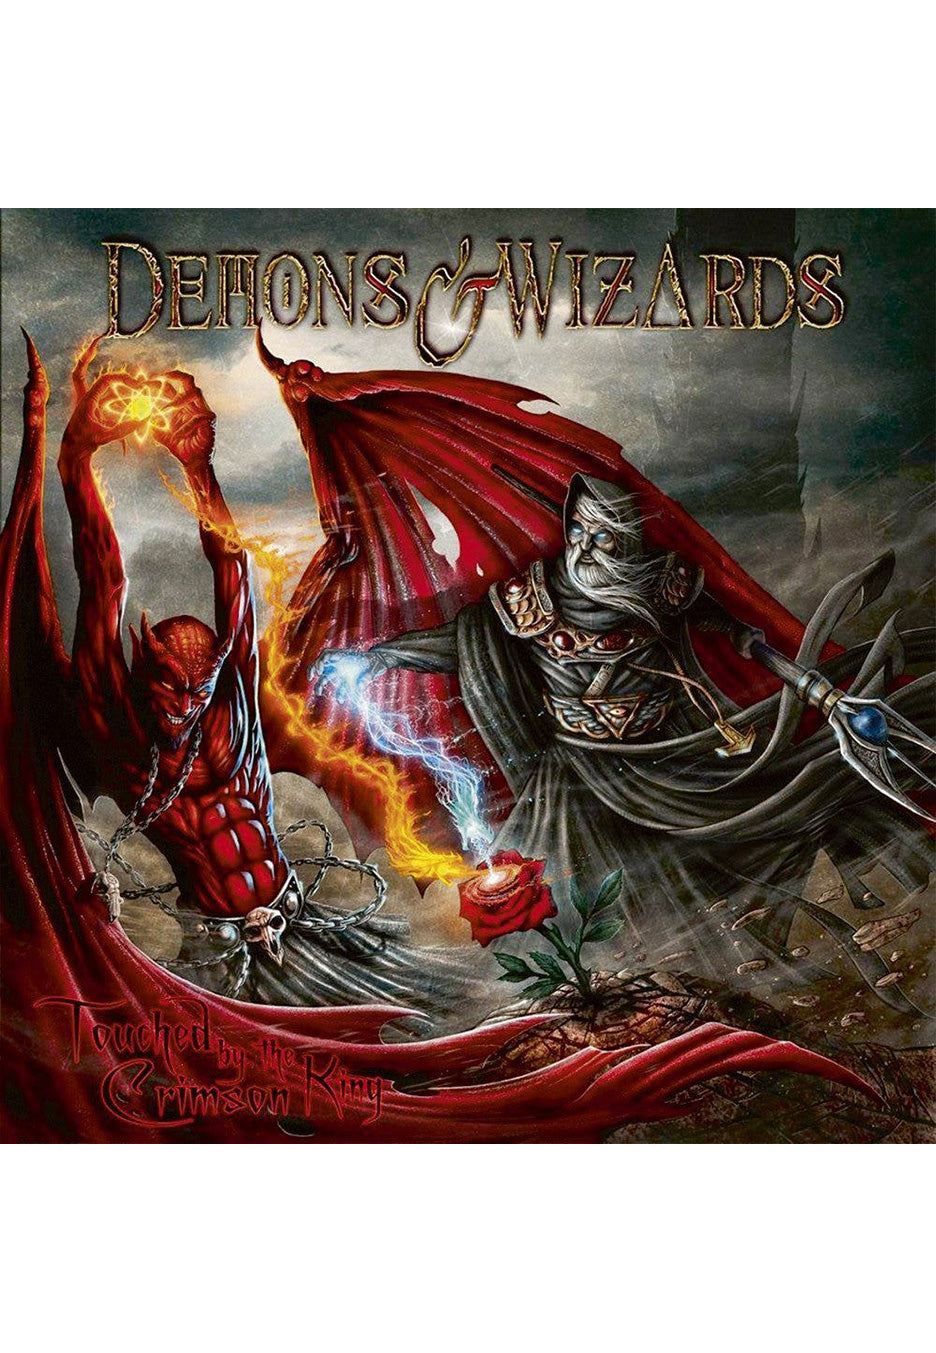 Demons & Wizards - Touched By The Crimson King Silver/Black - Marbled 2 Vinyl